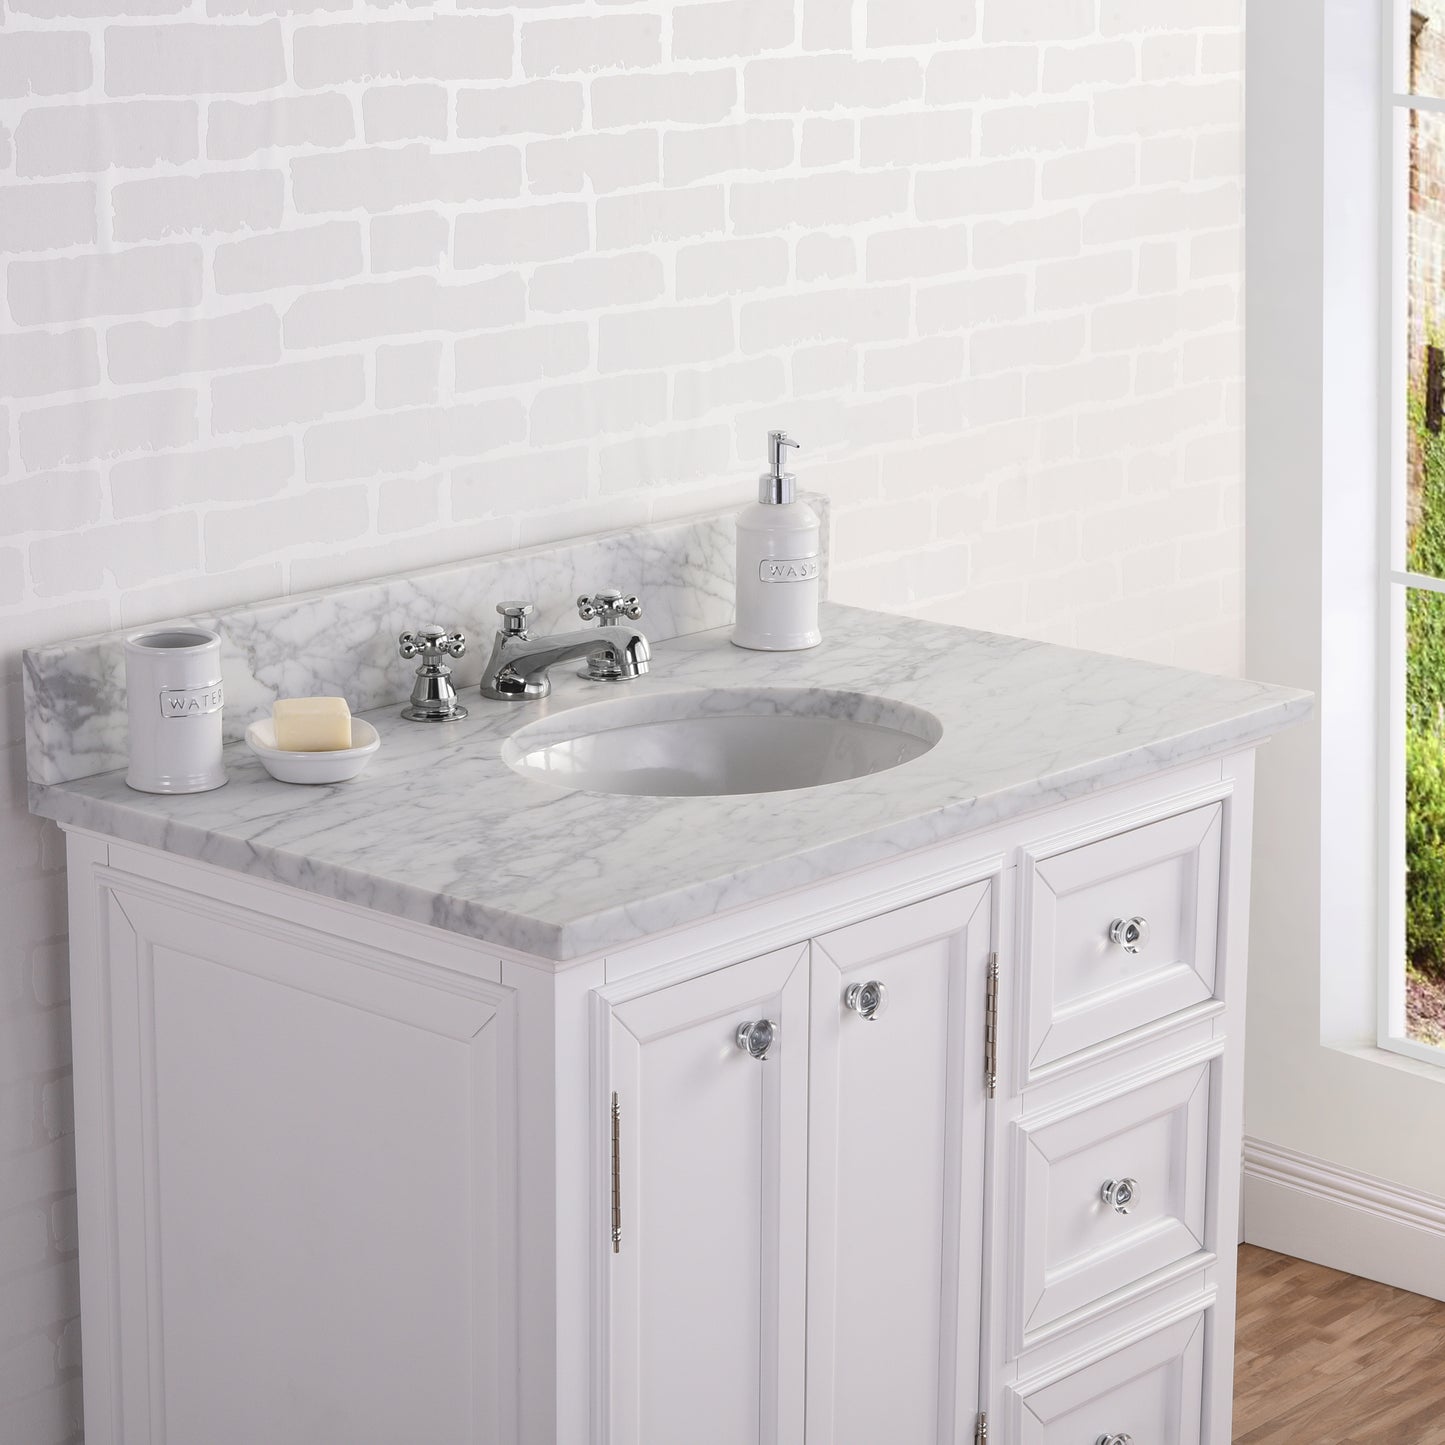 Derby 36 Inch Wide Pure White Single Sink Carrara Marble Bathroom Vanity With Matching Mirror And Faucet(s)- Water Creation